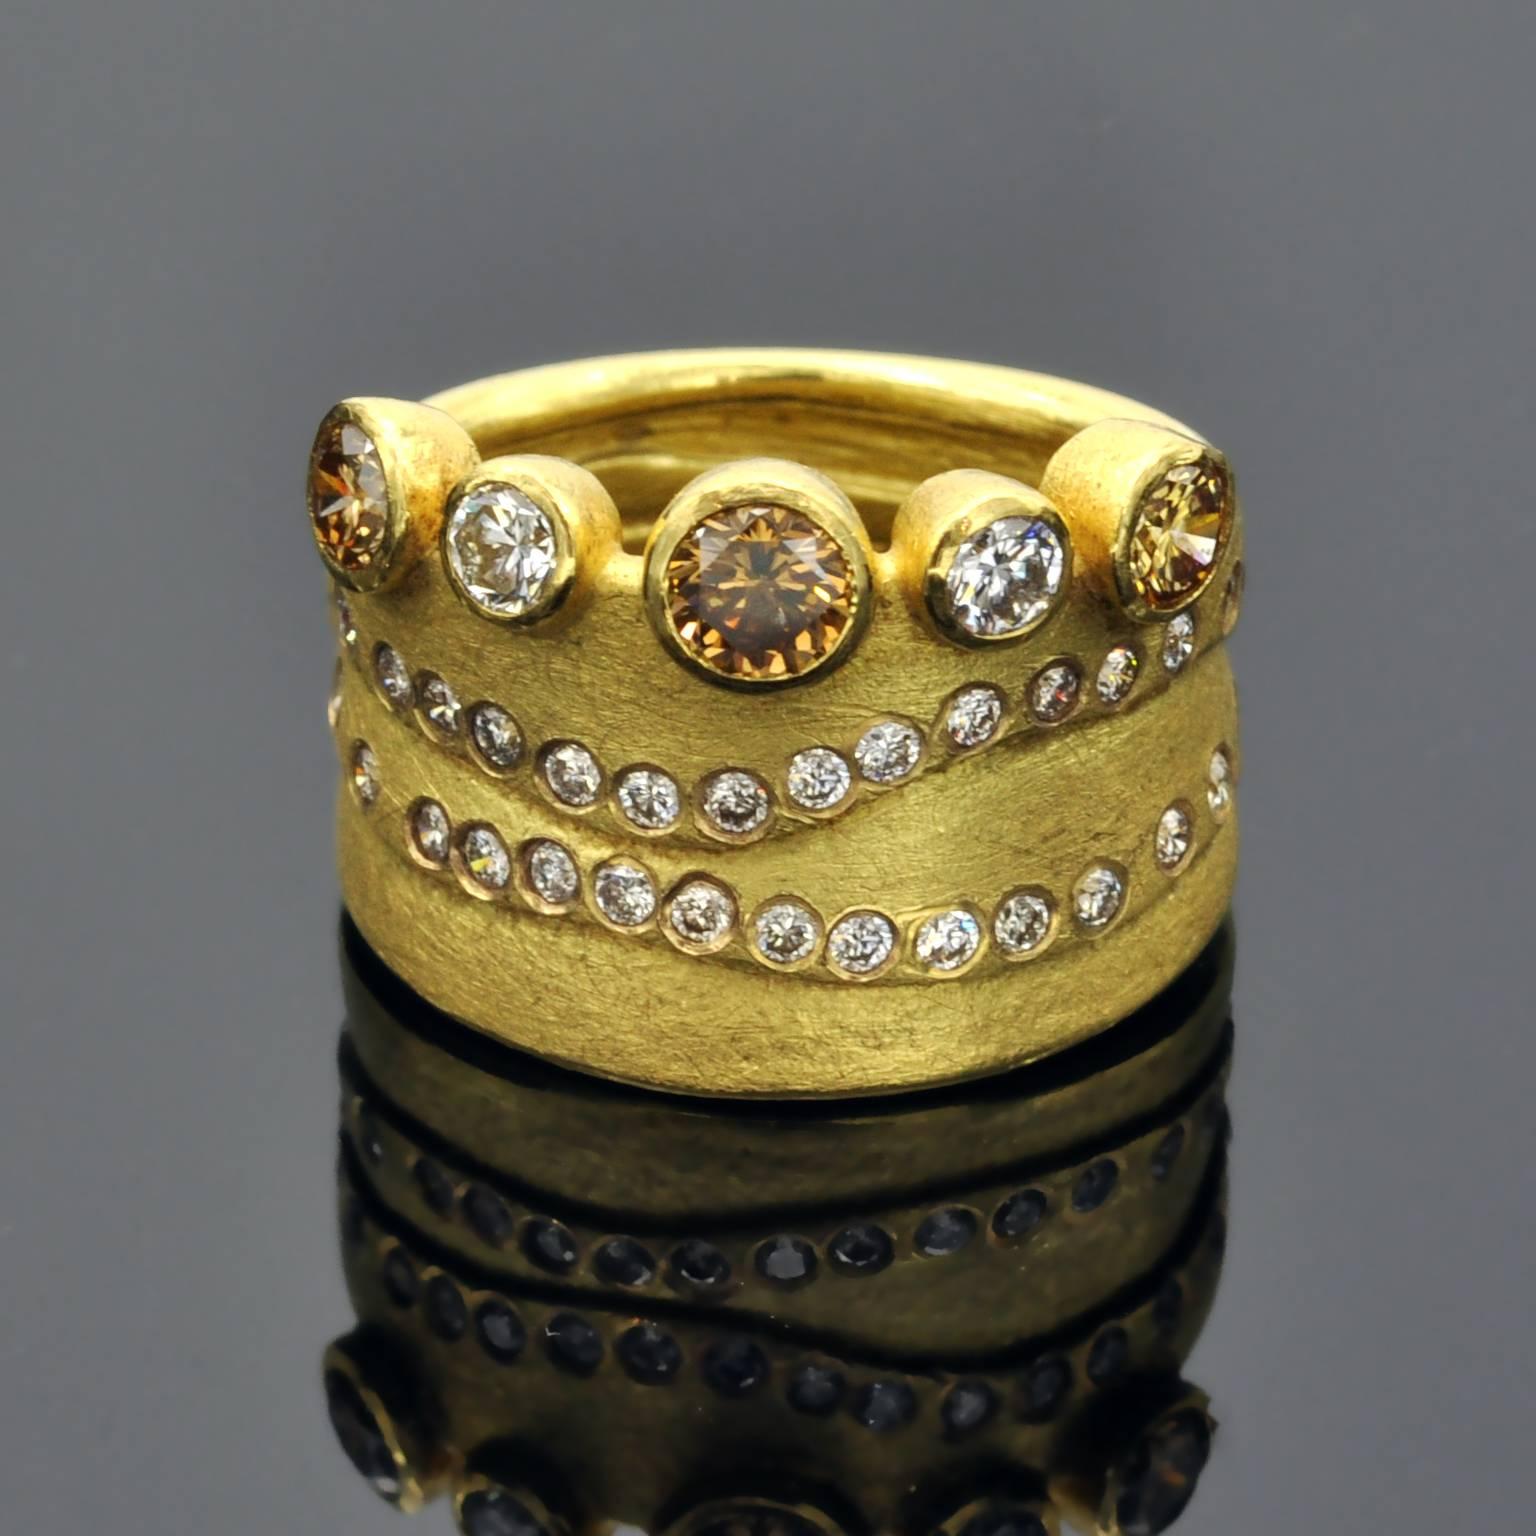 One of a kind modernist ring with ethnic inspiration. Champagne, brown and white diamonds are artistically combined to make this striking yet easy to wear ring. 

Michael Zobel is considered one of the most influential artist in the jewellery world.